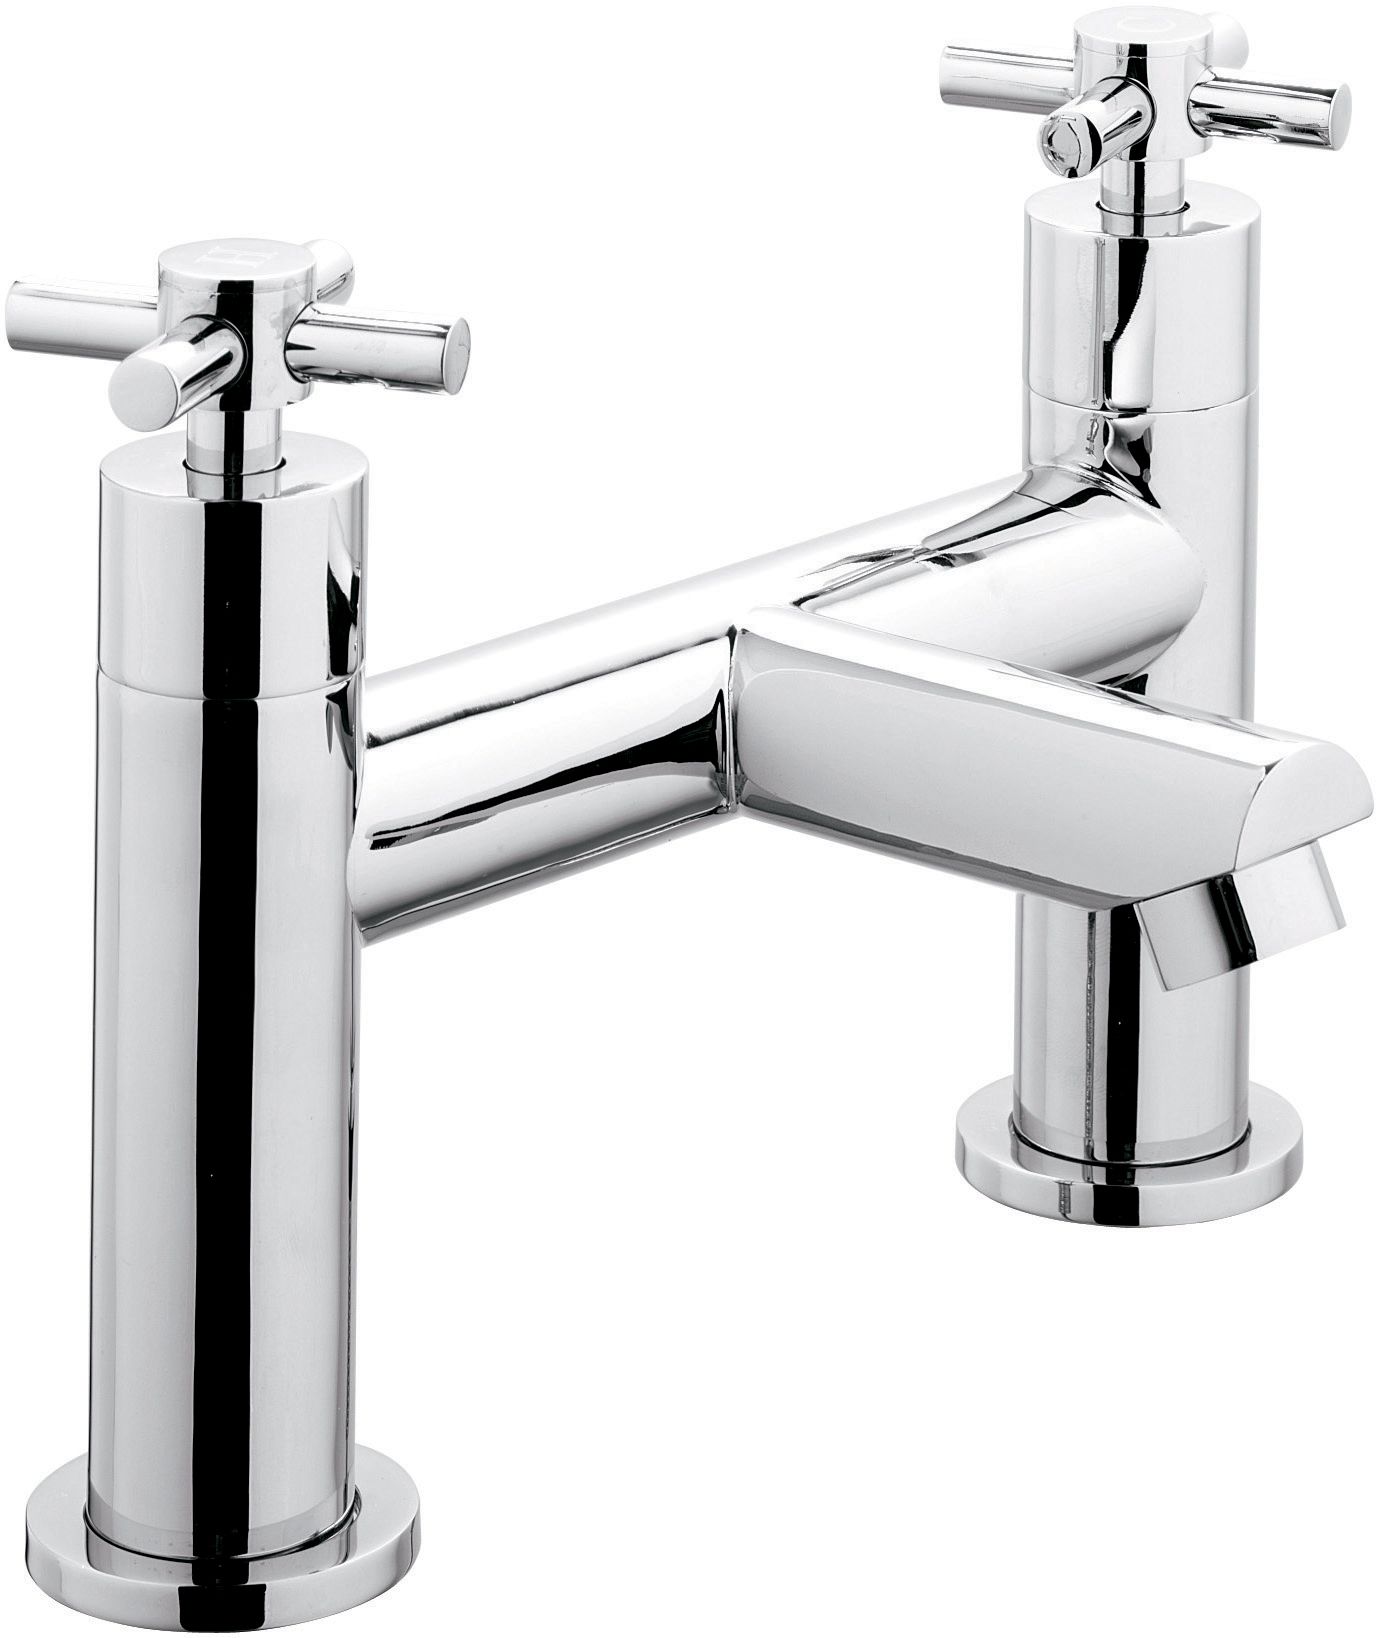 Image of Wickes Connect Bath Filler Tap - Chrome